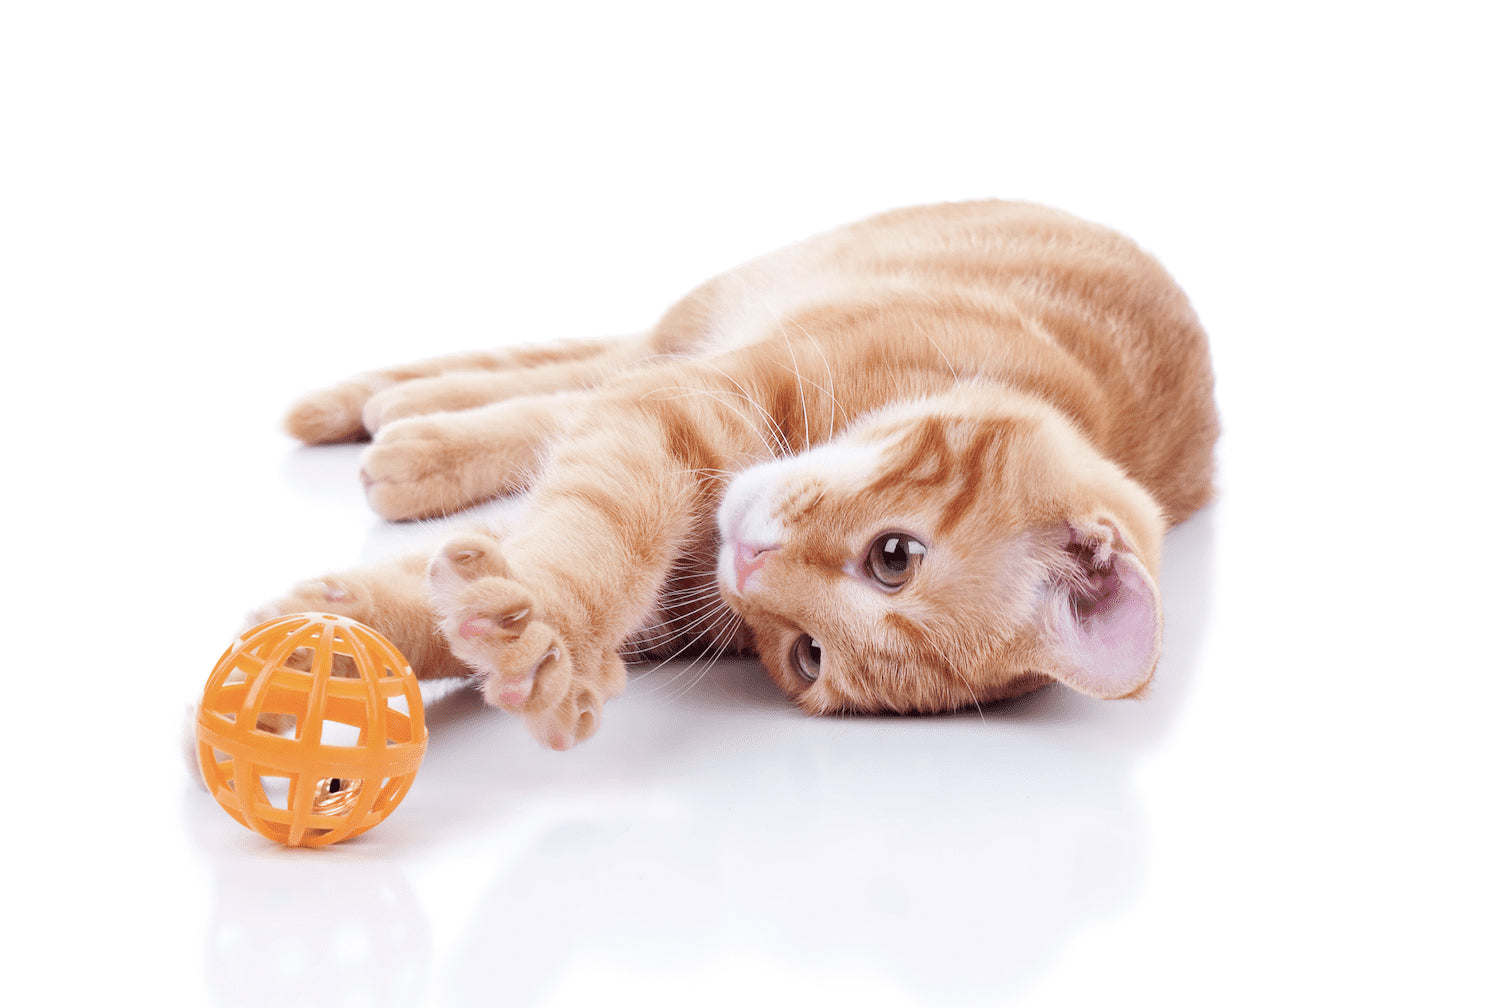 Fix Your Cat's Favorite Toy with Bondic: A Step-by-Step Guide for Frustrated Pet Parents